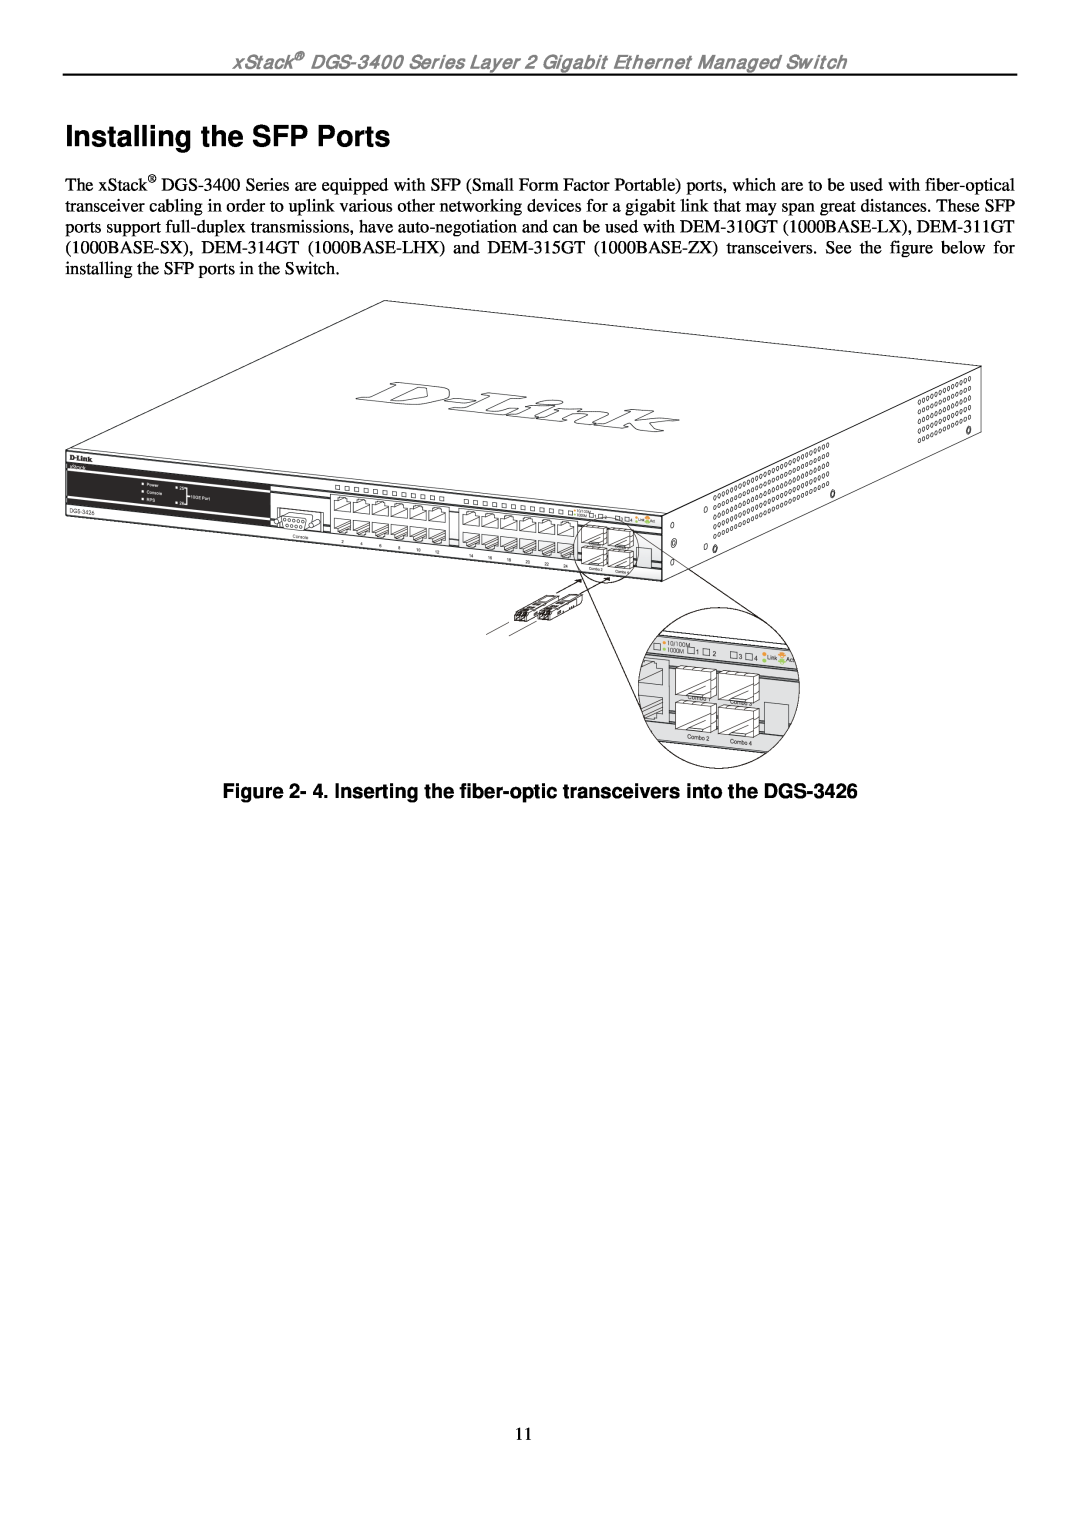 D-Link ethernet managed switch manual Installing the SFP Ports, 4. Inserting the fiber-optic transceivers into the DGS-3426 